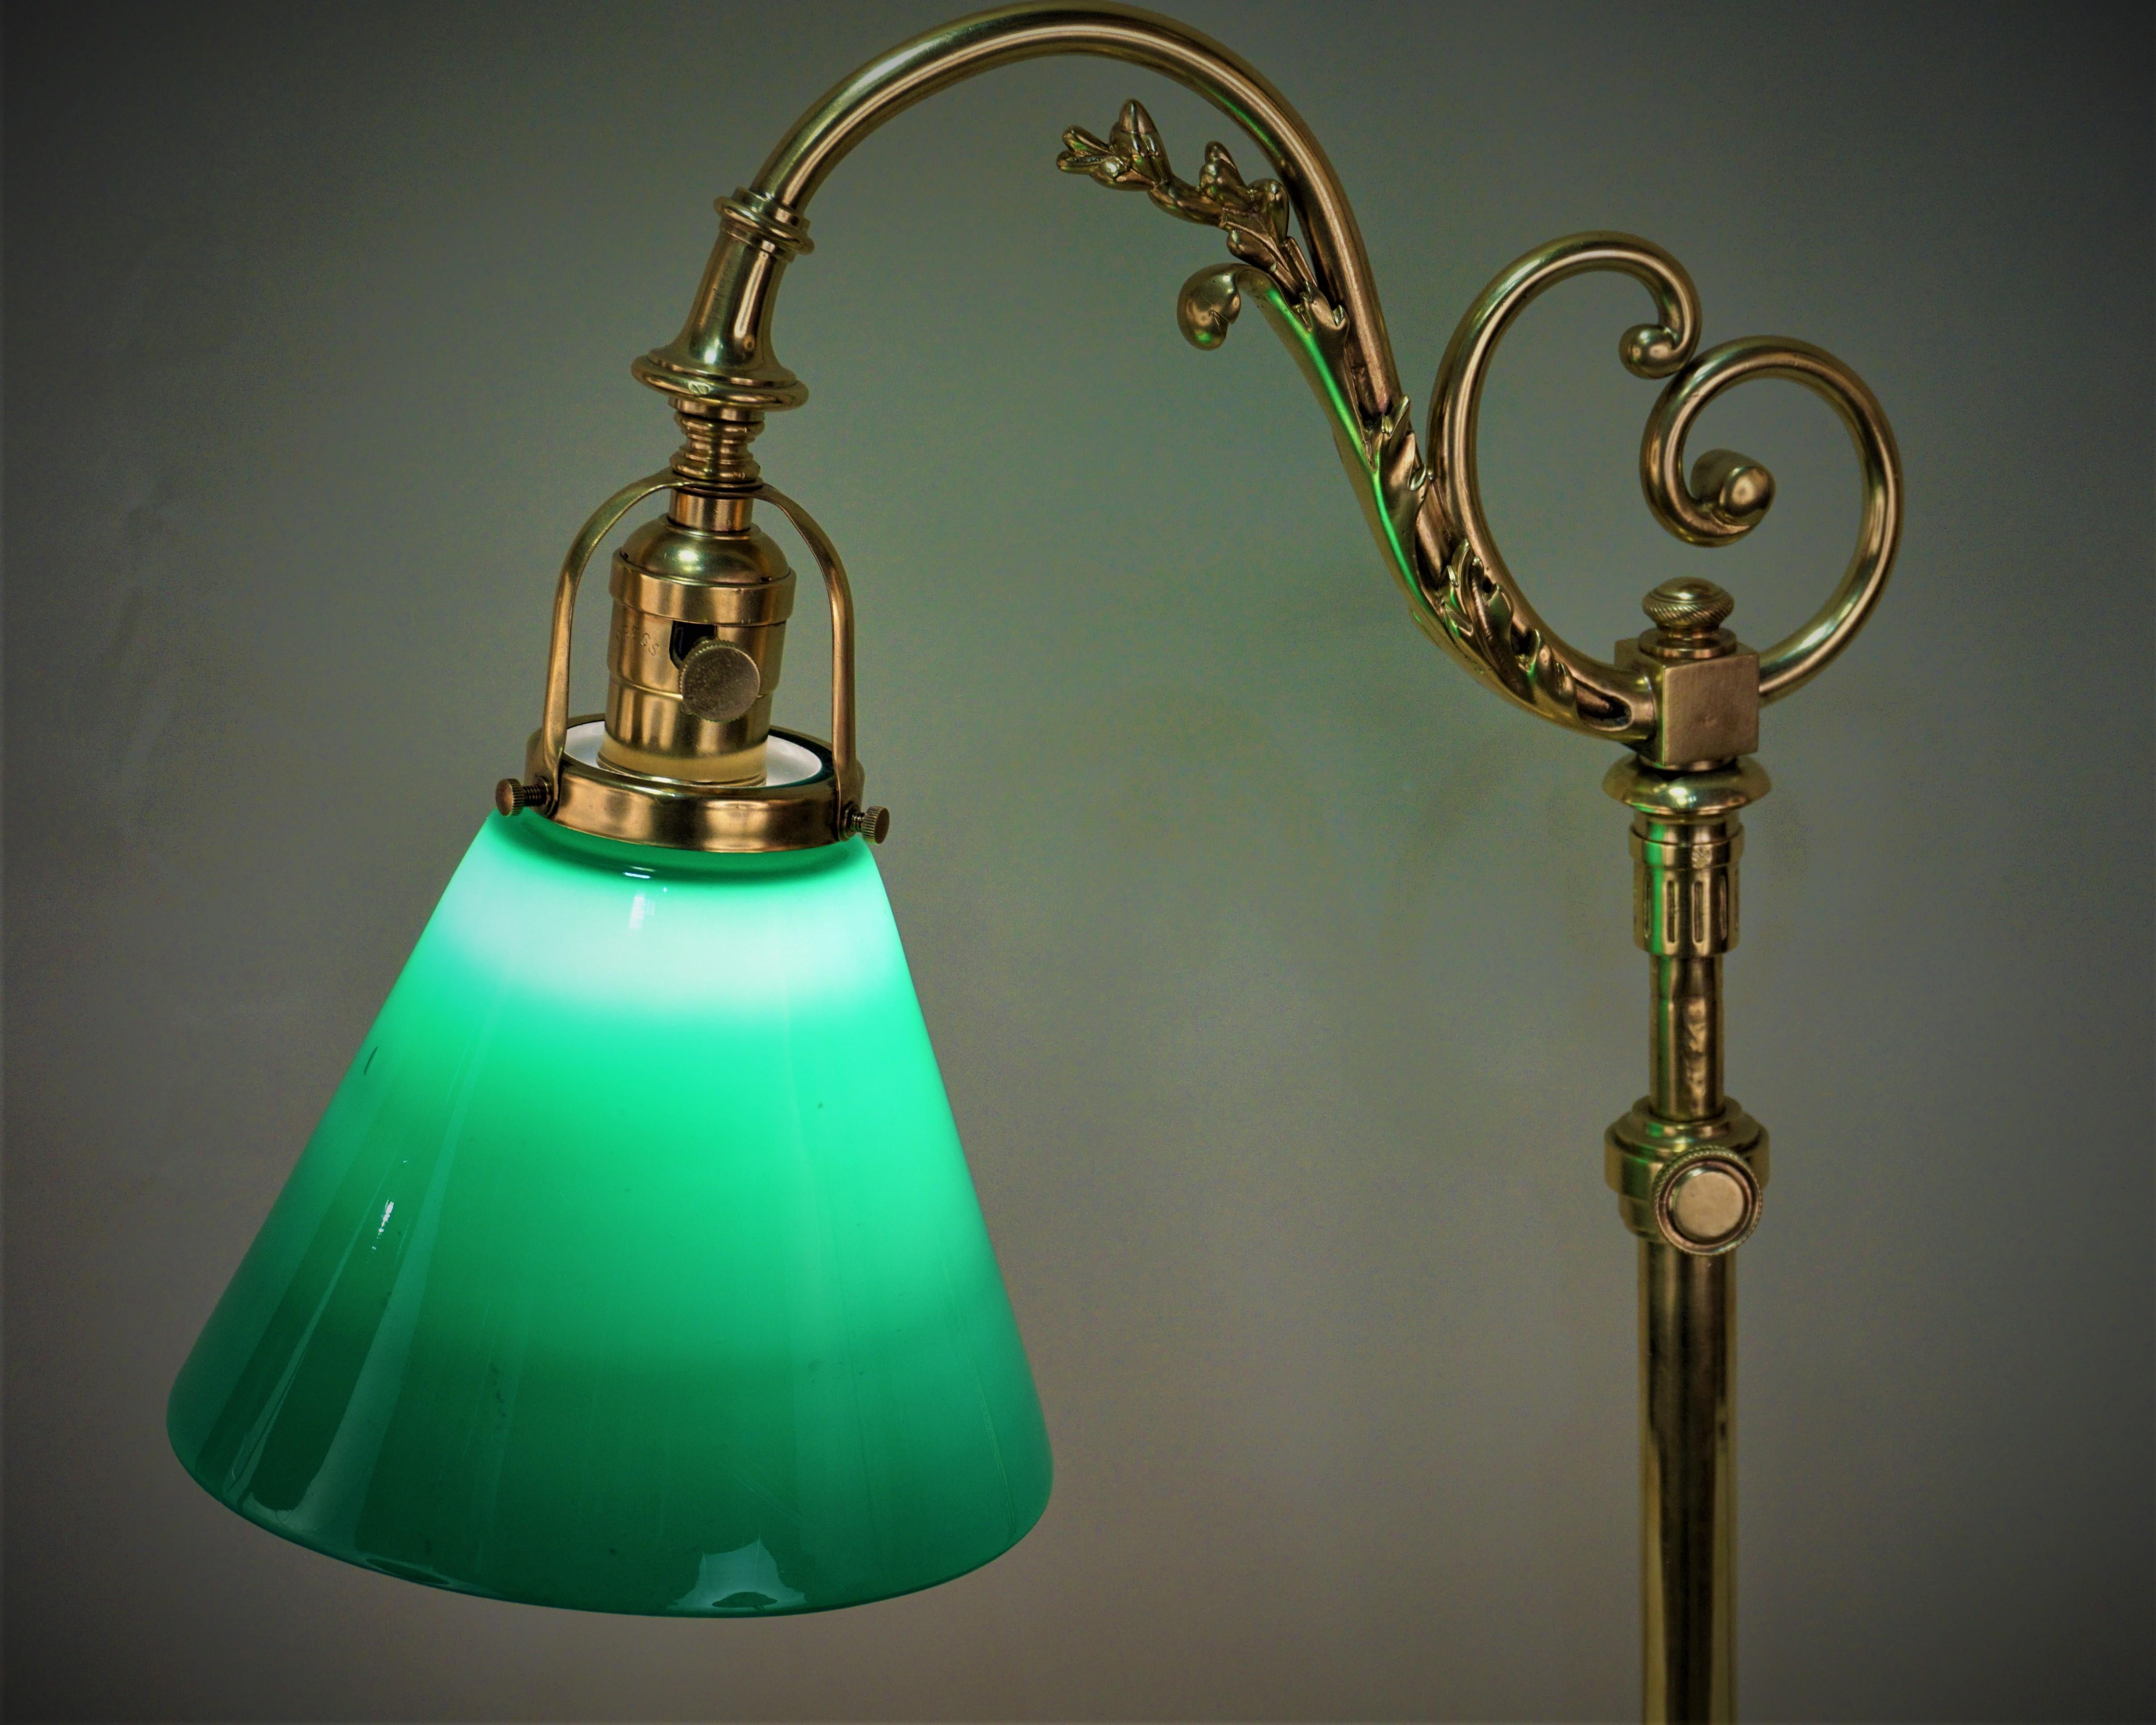 Hand polished bronze adjustable height table or desk lamp with case glass green and white shade.